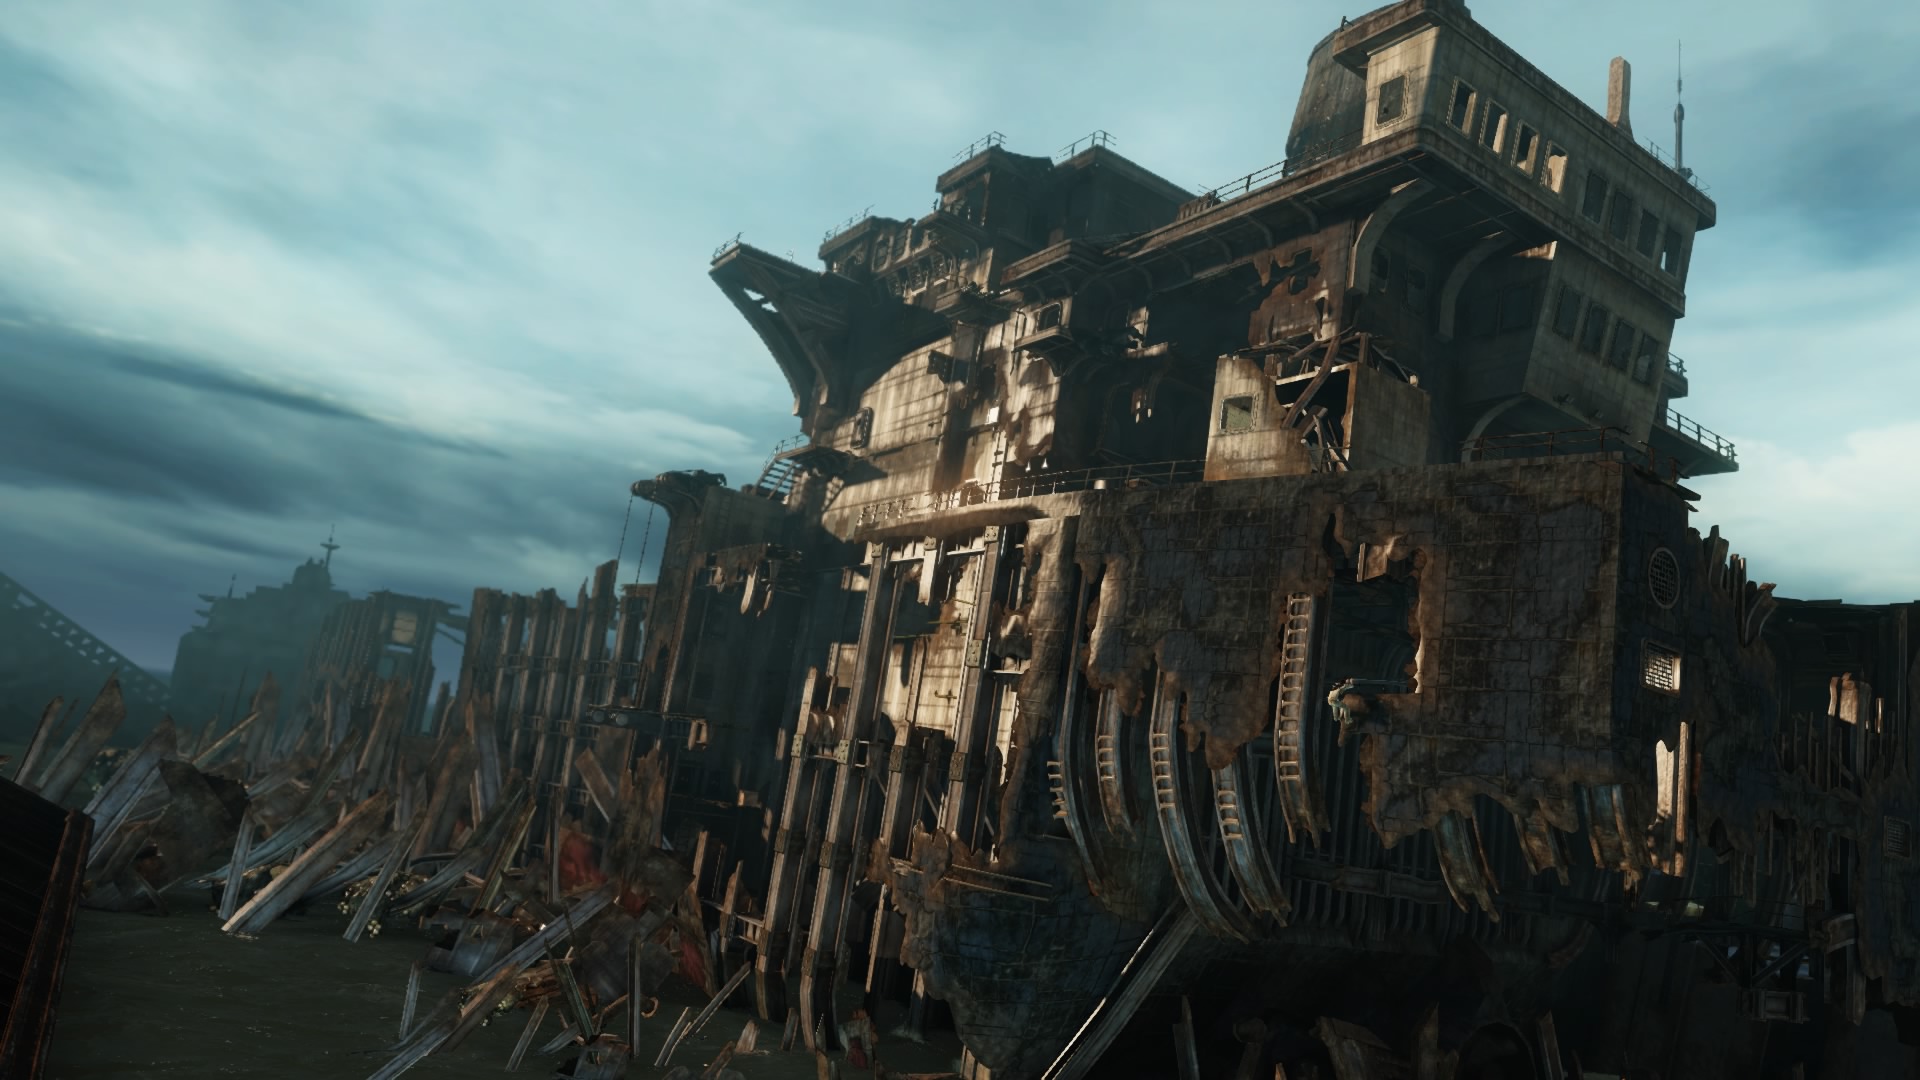 An abandoned shipyard with huge ghost ships